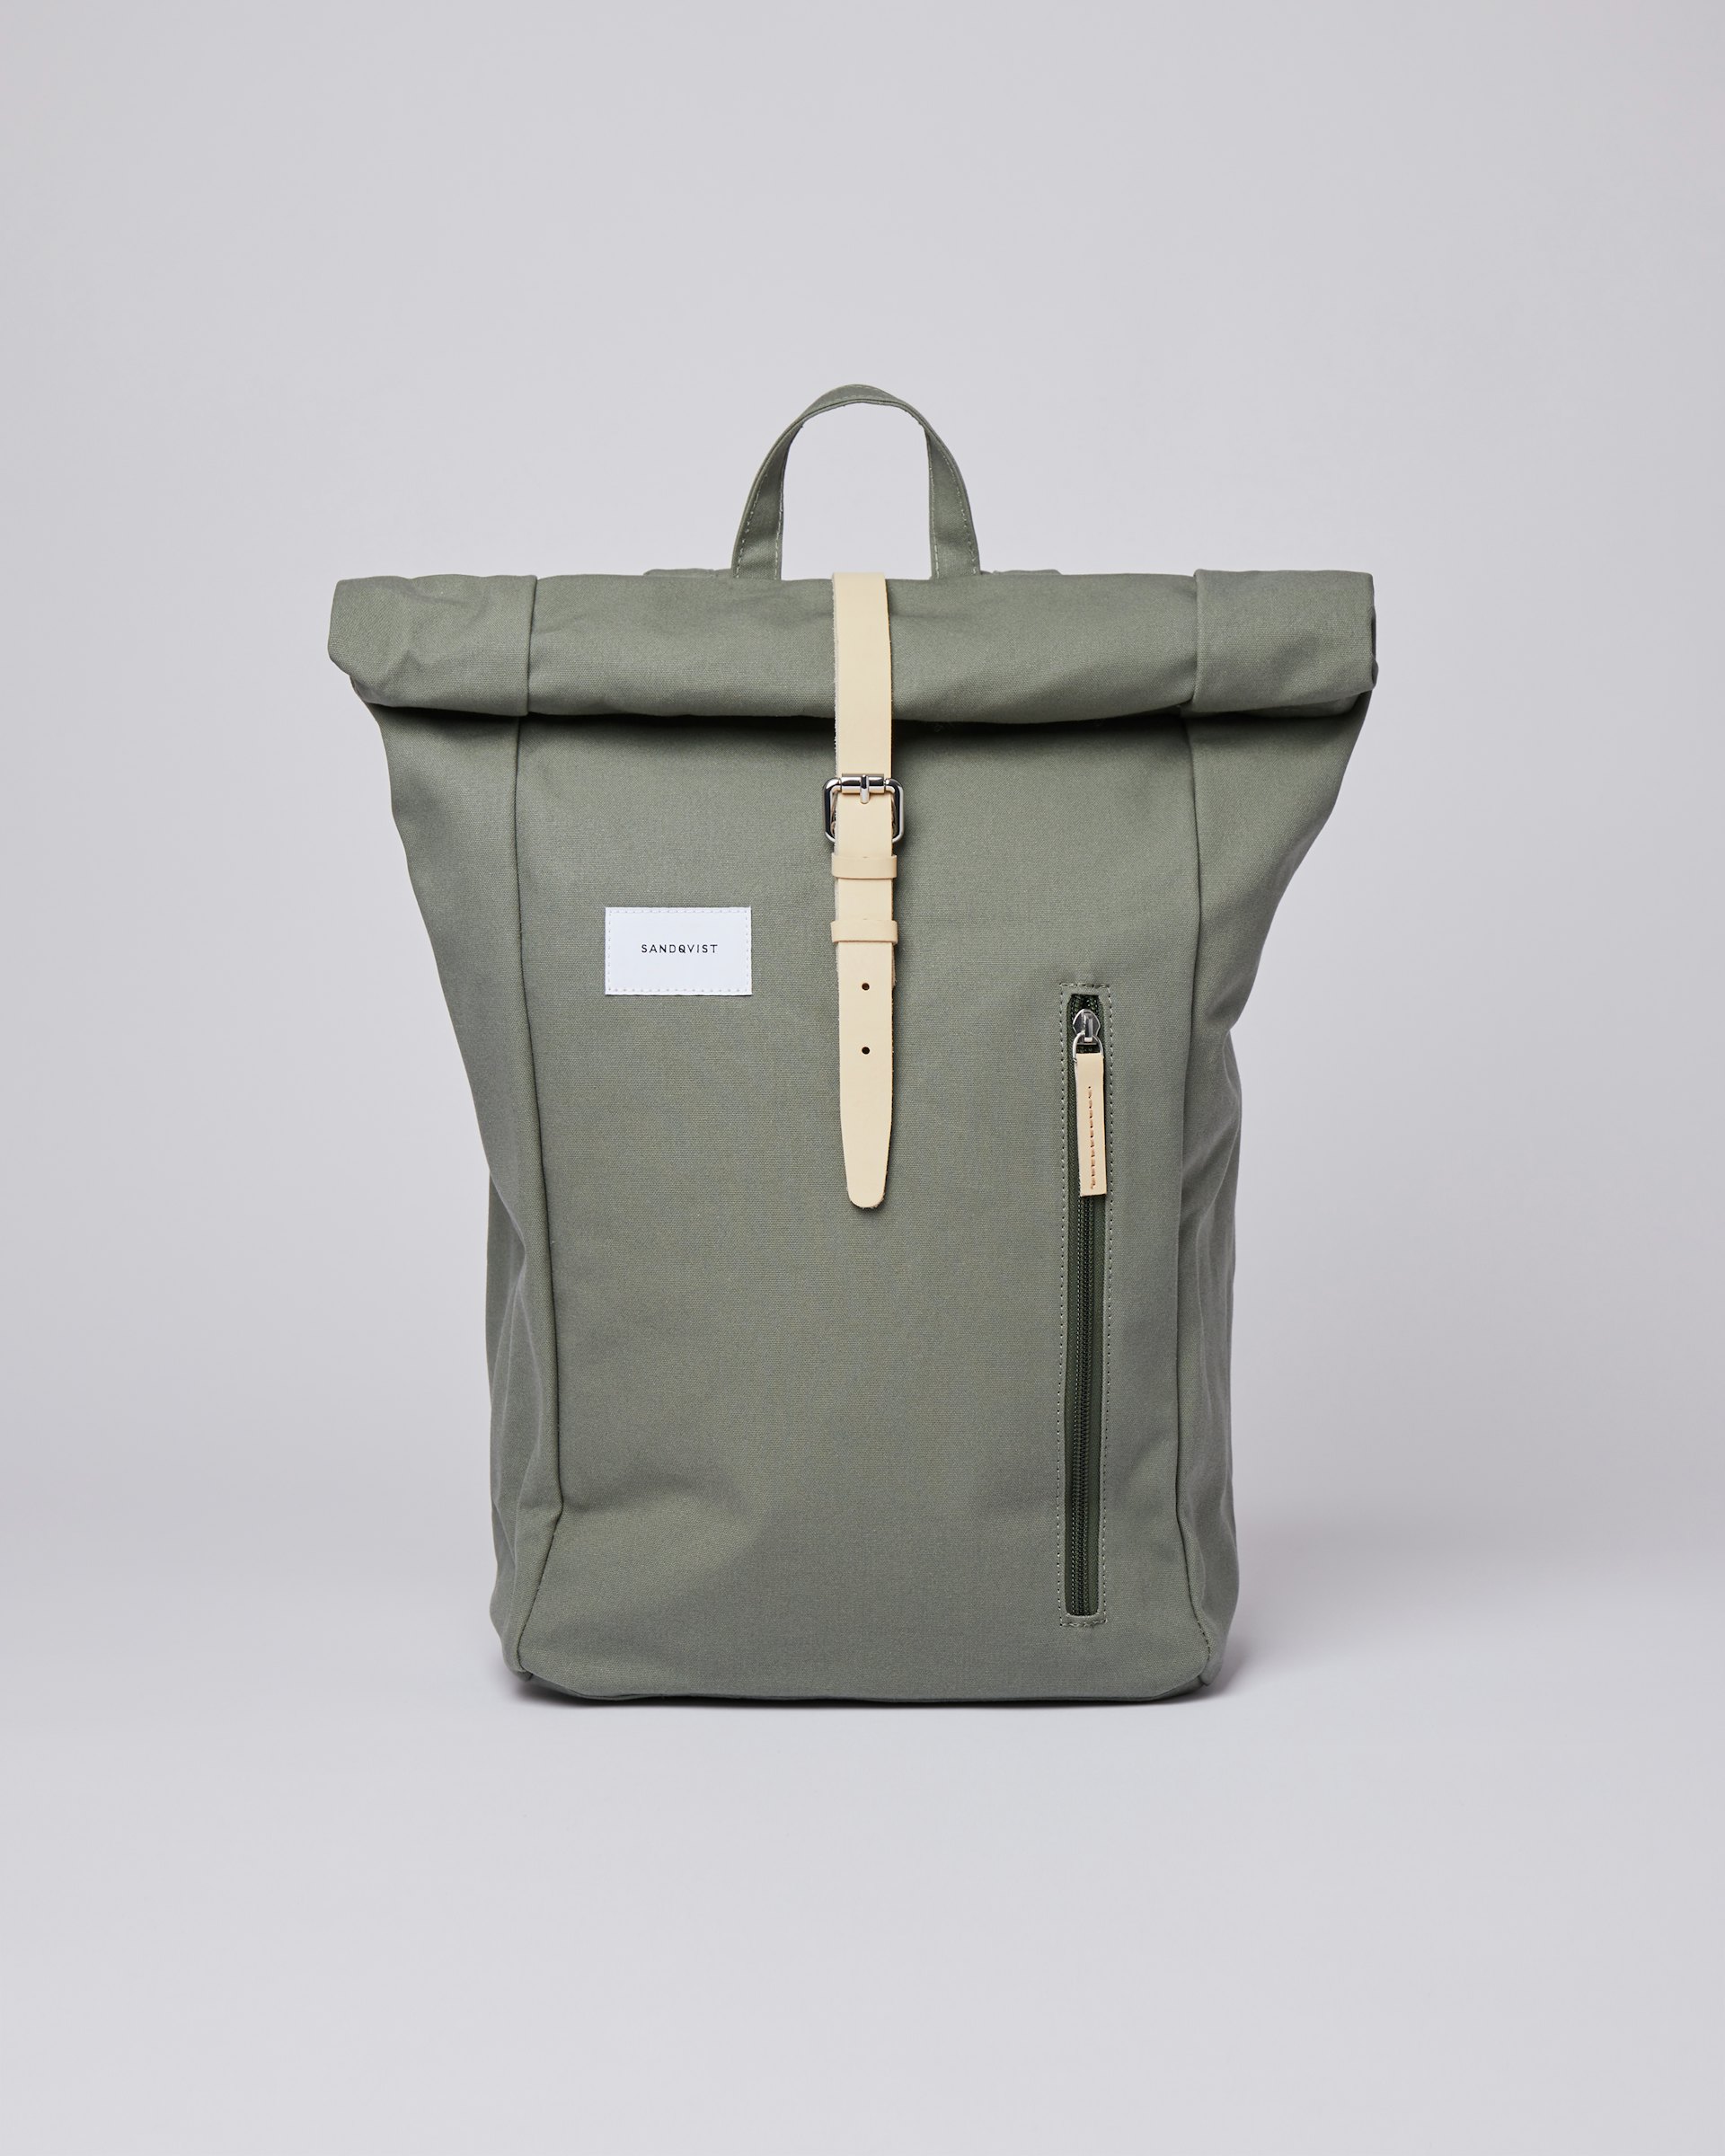 Dante belongs to the category Backpacks and is in color dusty green